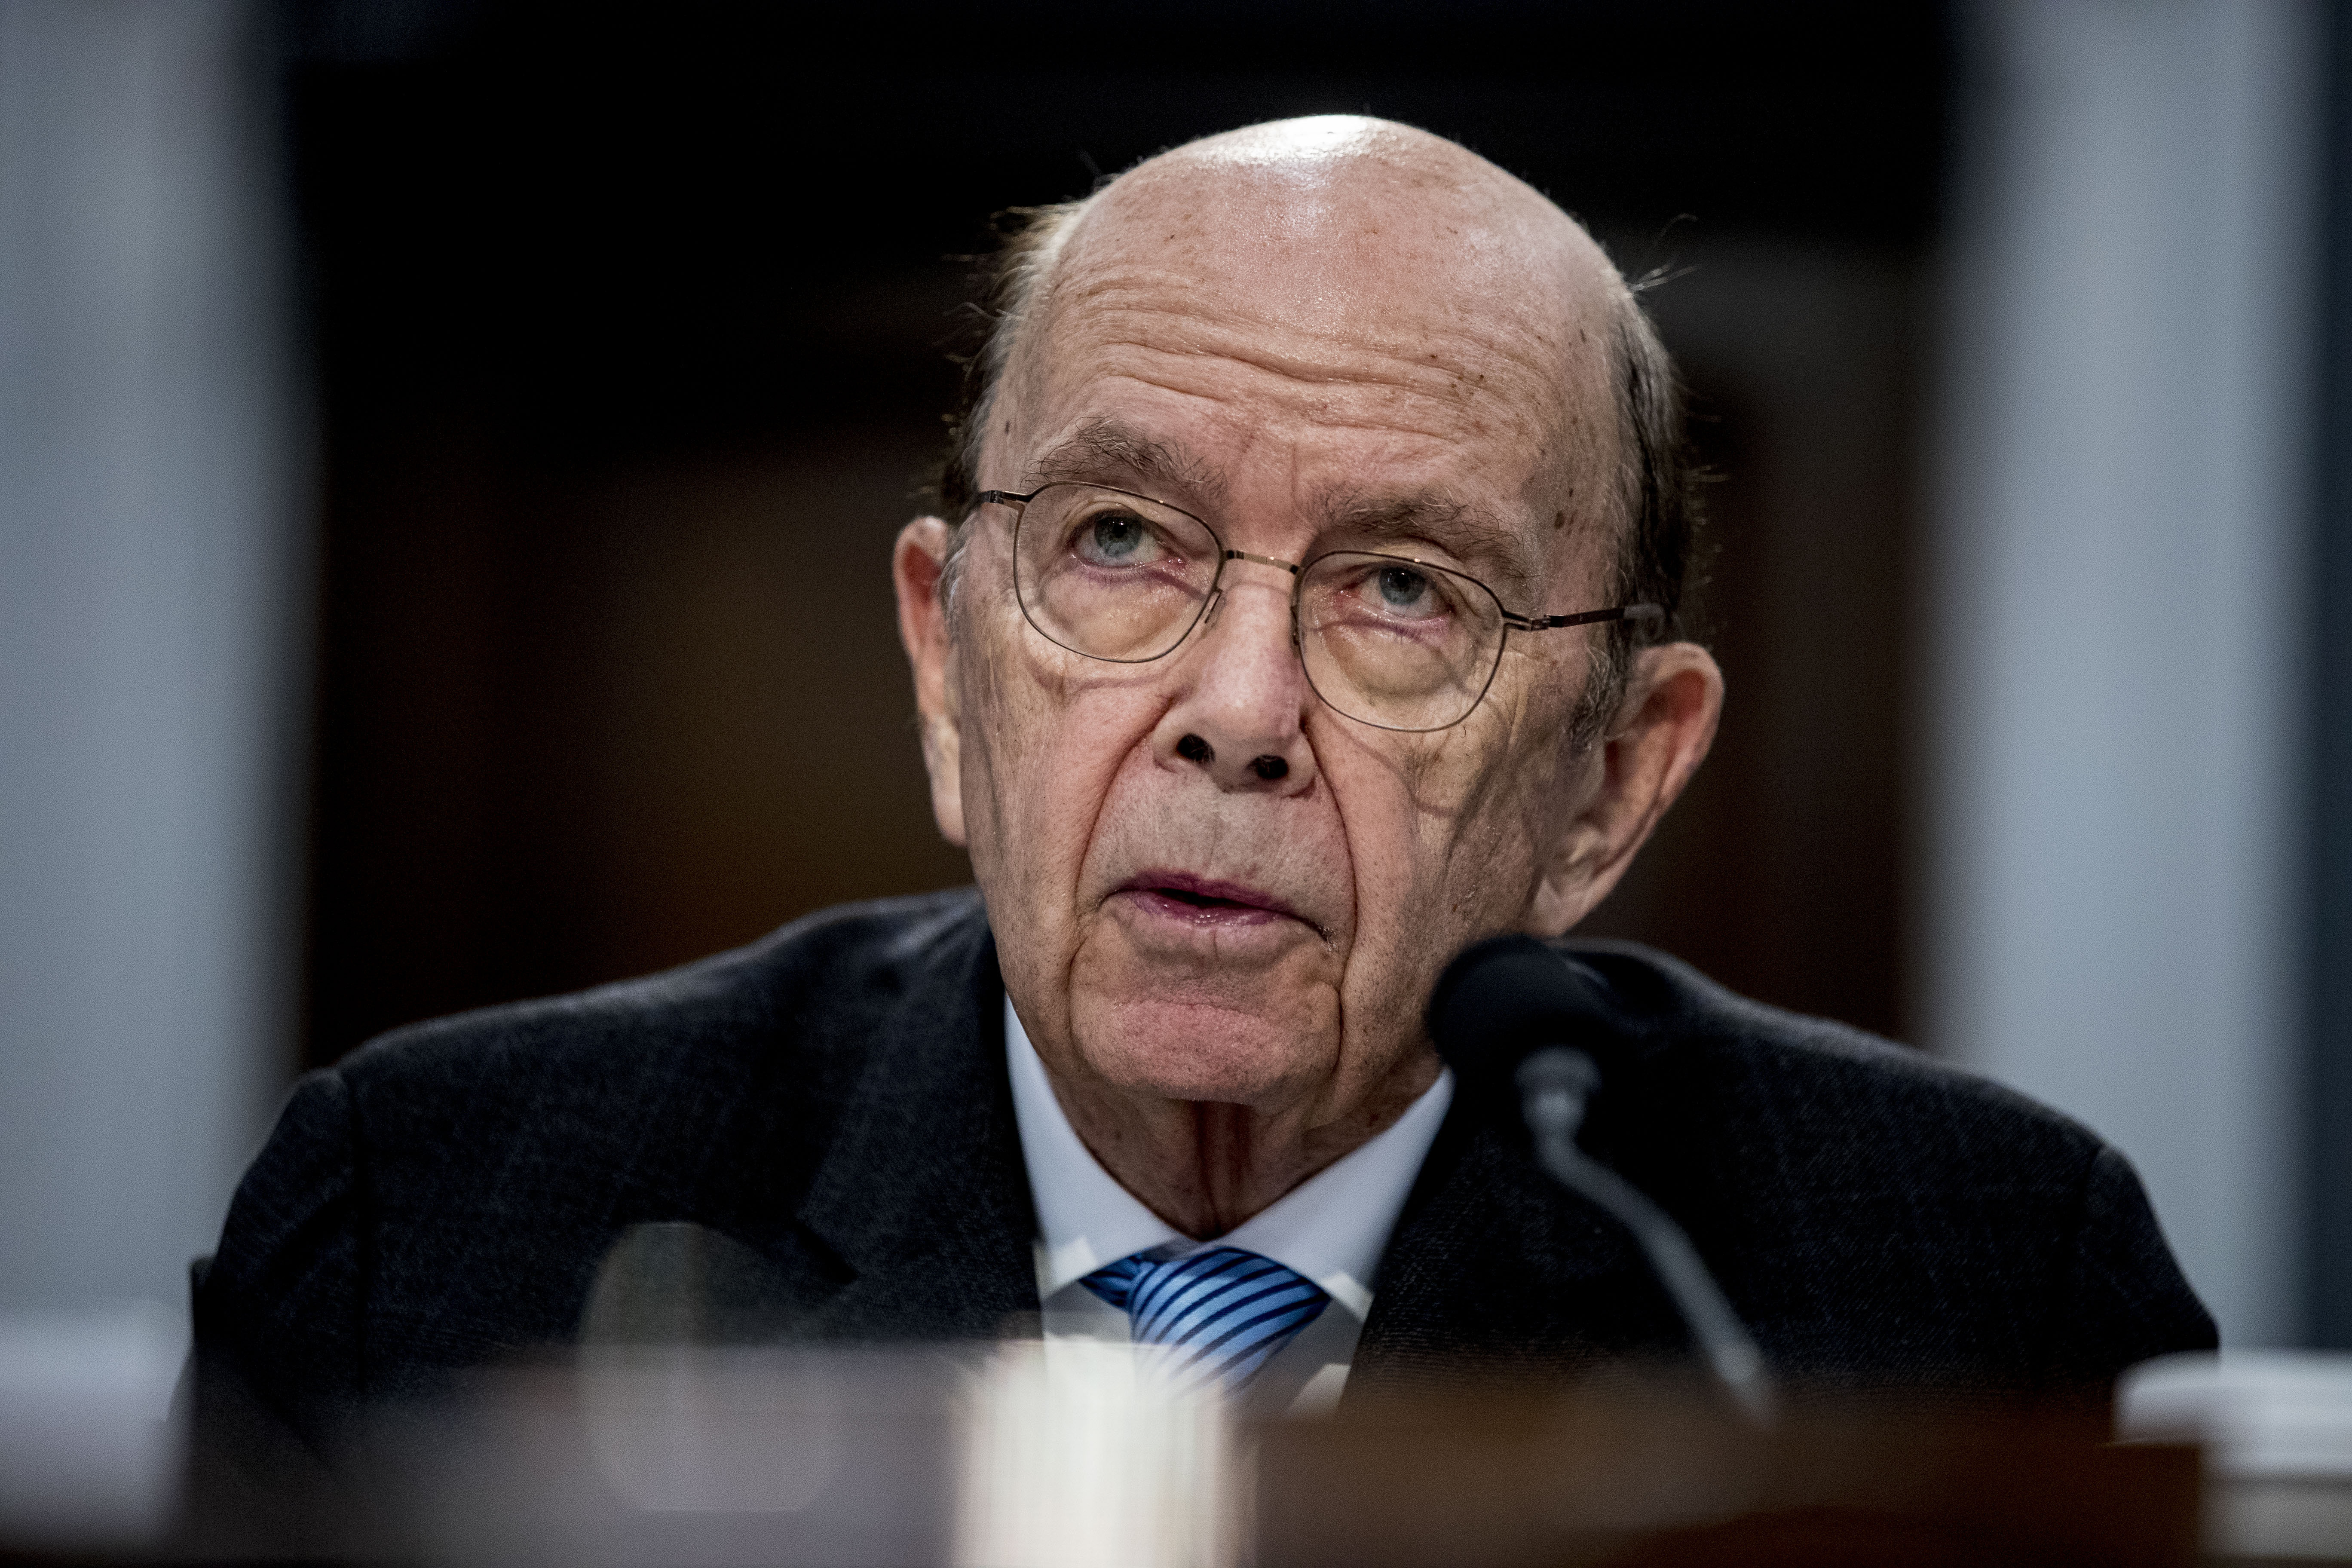 Commerce Secretary Wilbur Ross testifies before a House Appropriations subcommittee on budget on Capitol Hill, on Tuesday, March 10, in Washington.